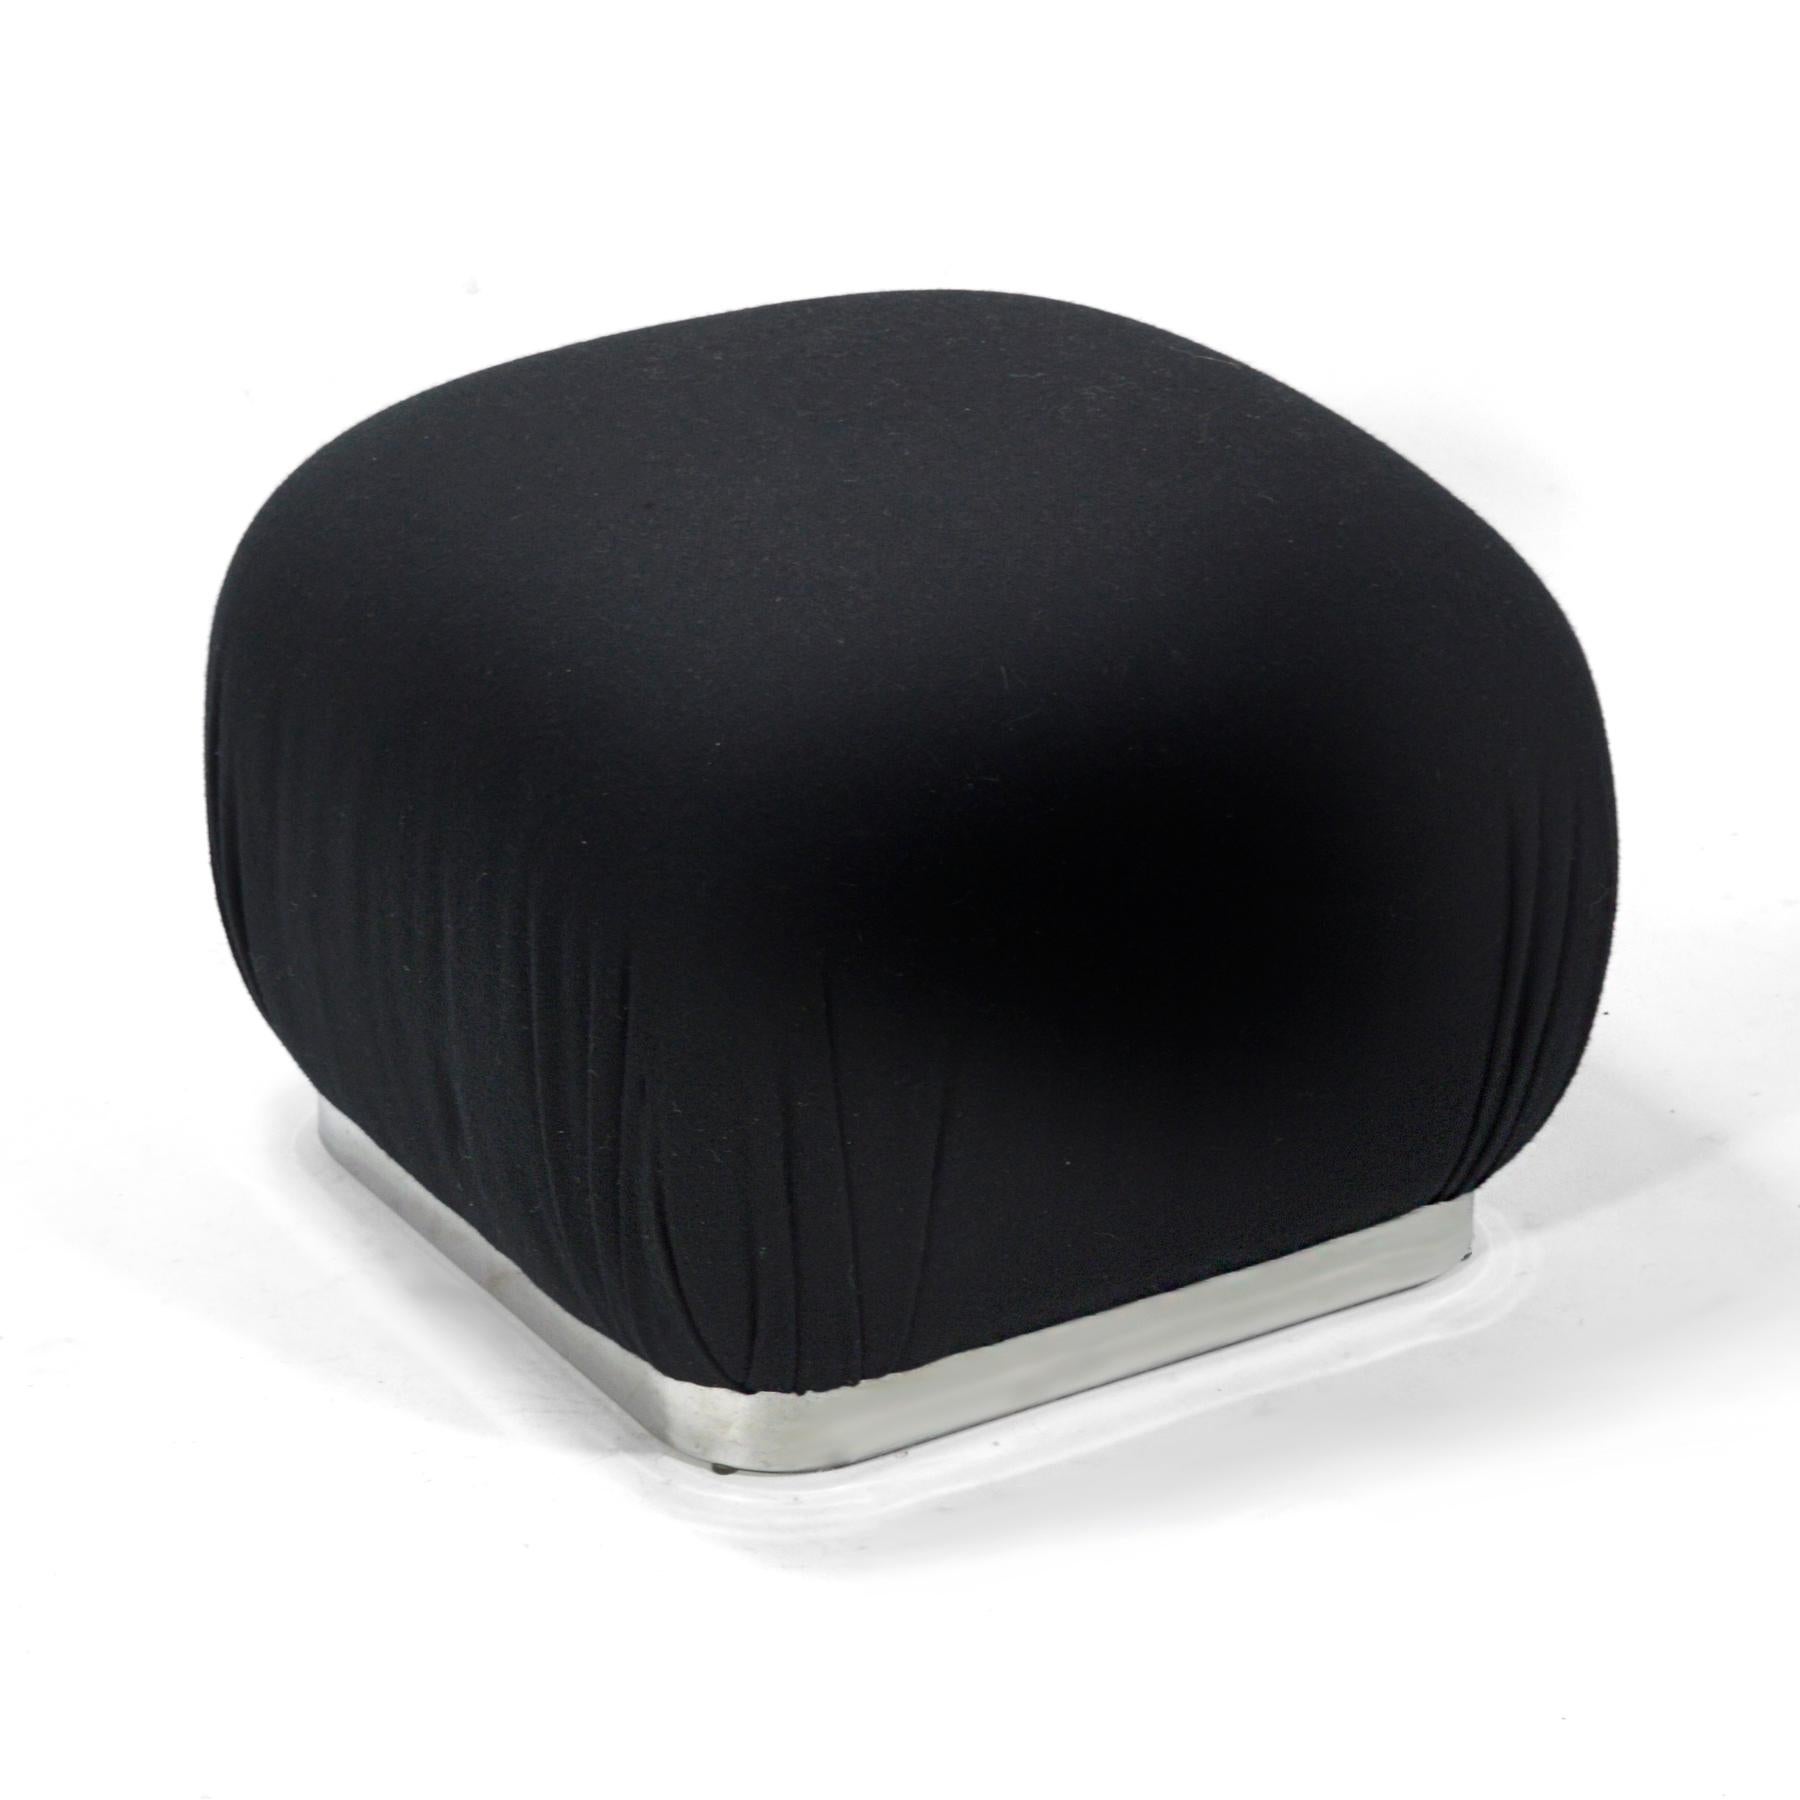 An iconic design of Karl Springer's, the souffle pouf saw many interations by different makers. This example is unmarked, but of very good quality with a chromed steel base and a nice, solid black pleated upholstery.
  